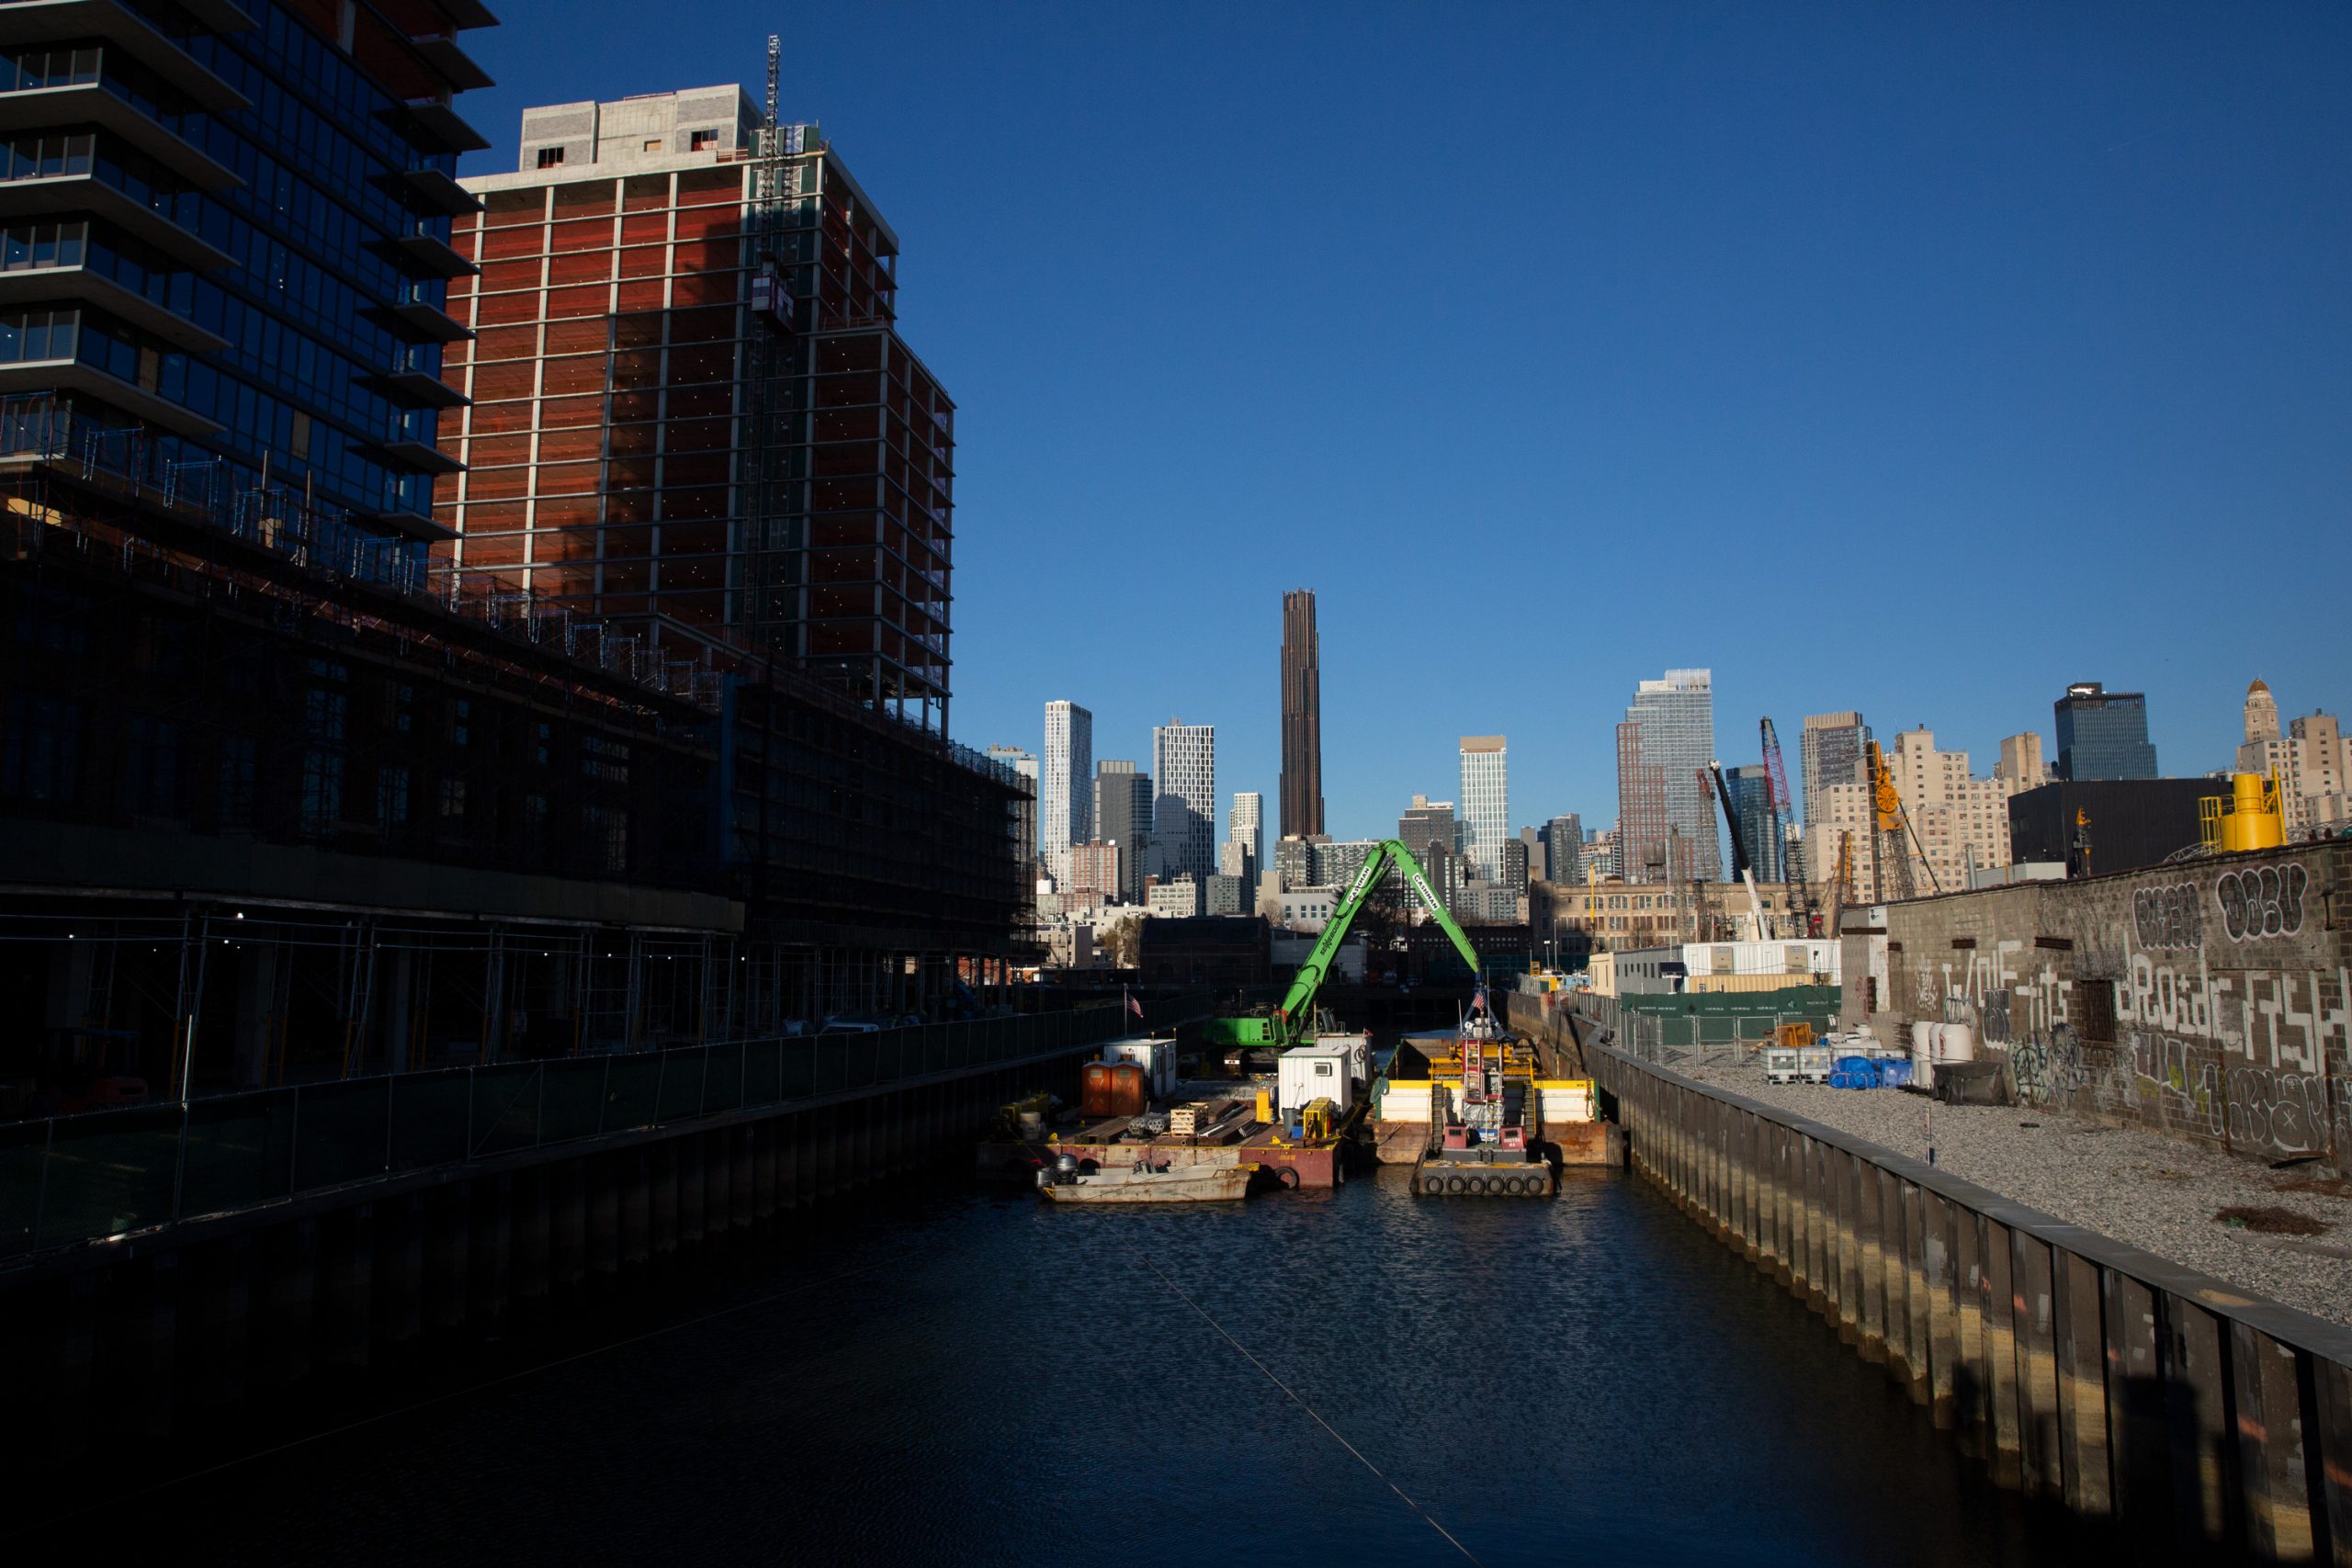 The federal Environmental Protection Agency has been working to remediate the Gowanus Superfund site while new construction goes up along the canal.